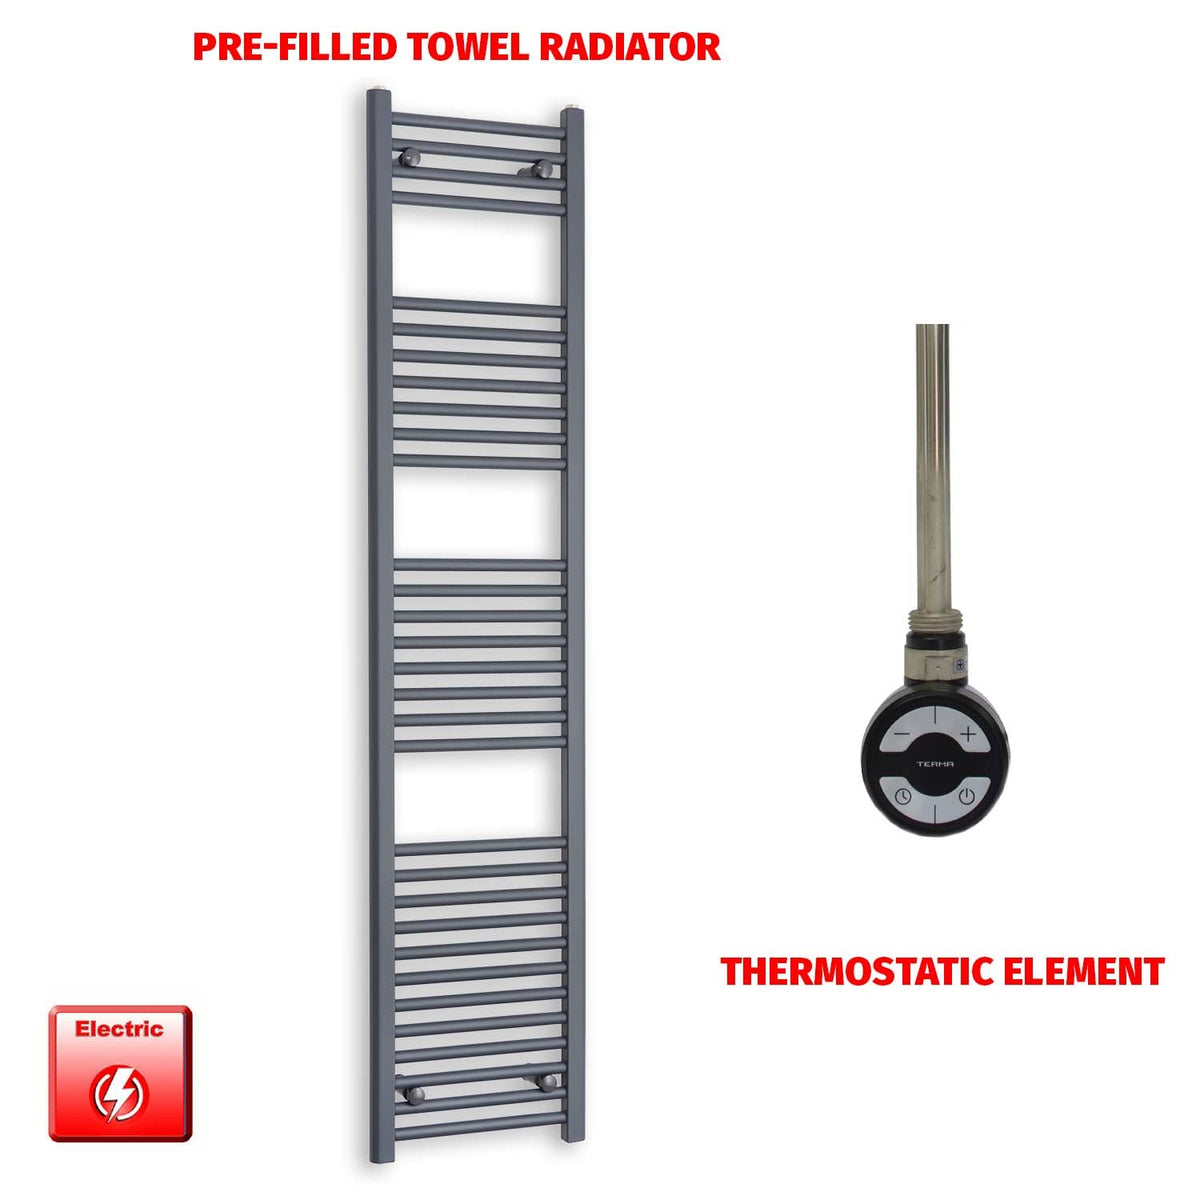 1800mm High 400mm Wide Flat Anthracite Pre-Filled Electric Towel Rail Radiator HTR MOA Thermostatic element no timer